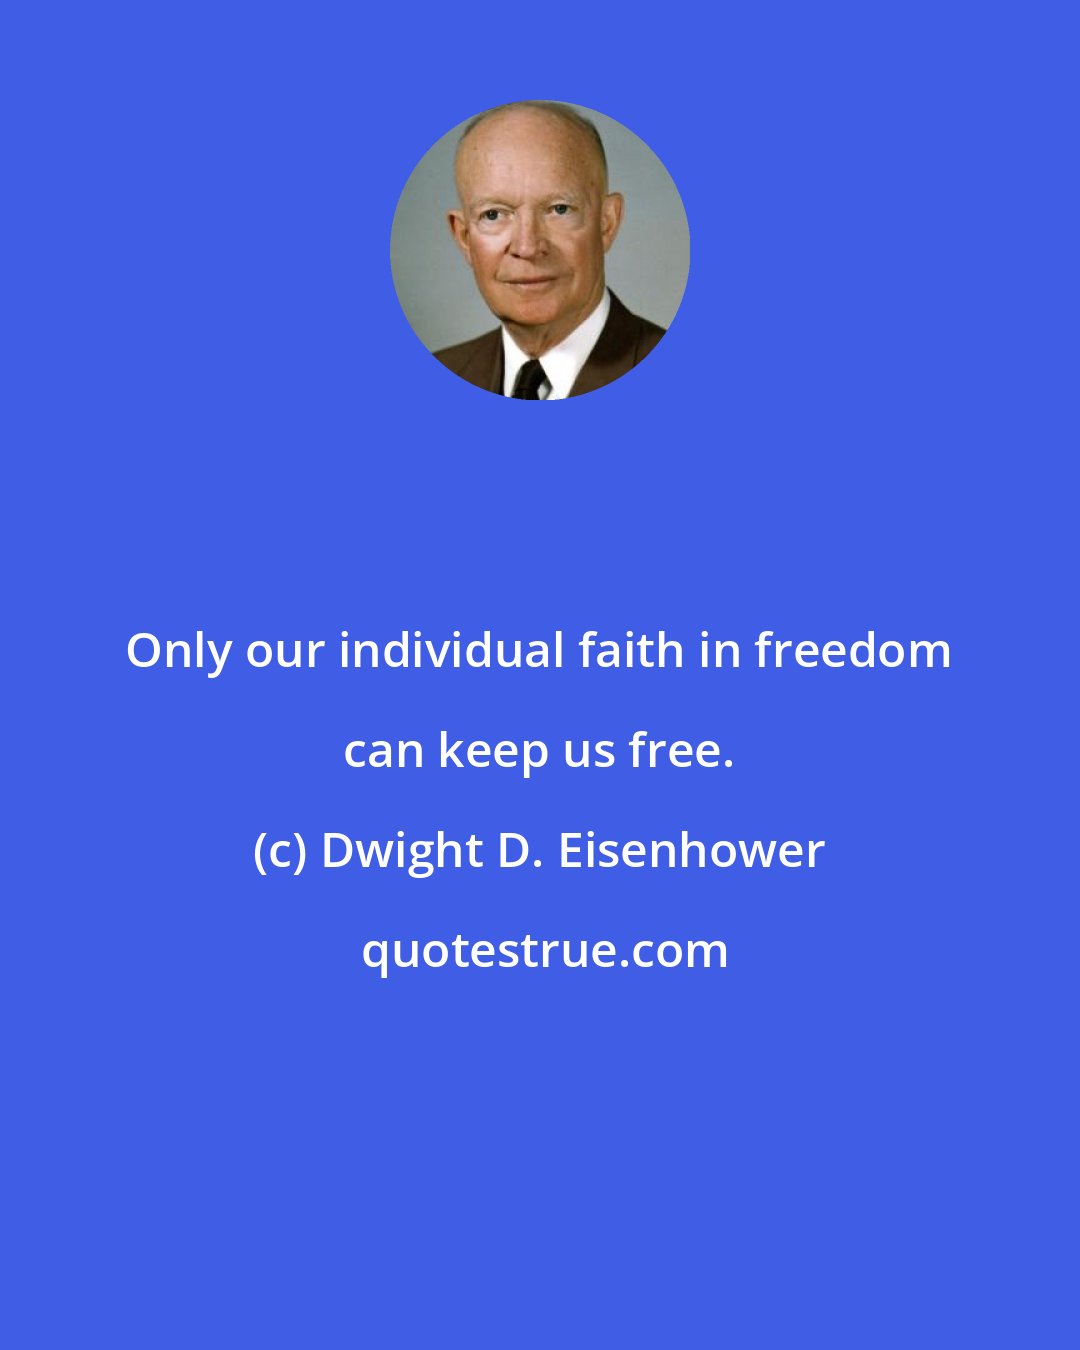 Dwight D. Eisenhower: Only our individual faith in freedom can keep us free.